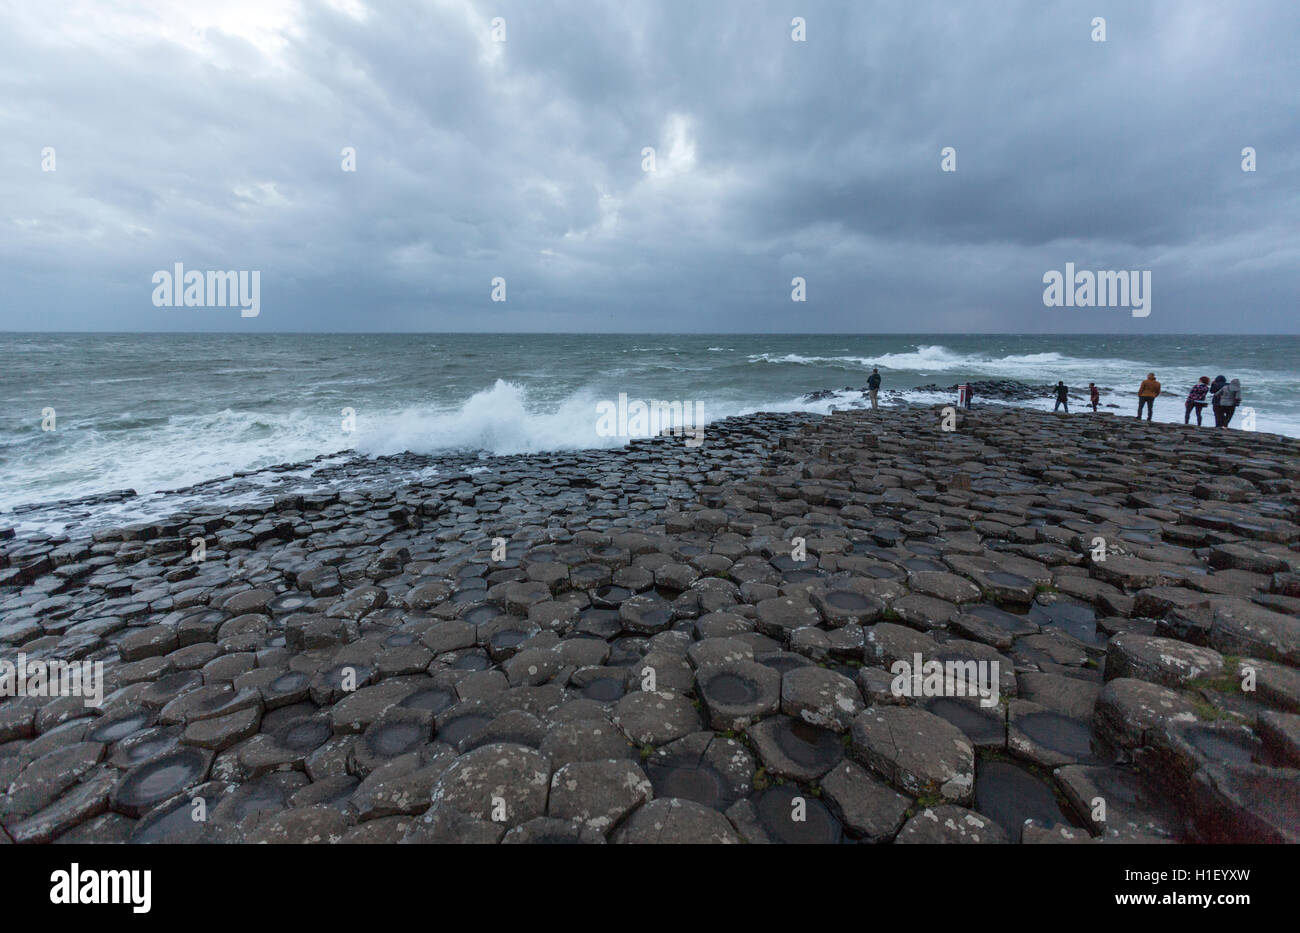 People near a brave ocean in Giant's Causeway, Bushmills, County Antrim, Northern Ireland, UK Stock Photo